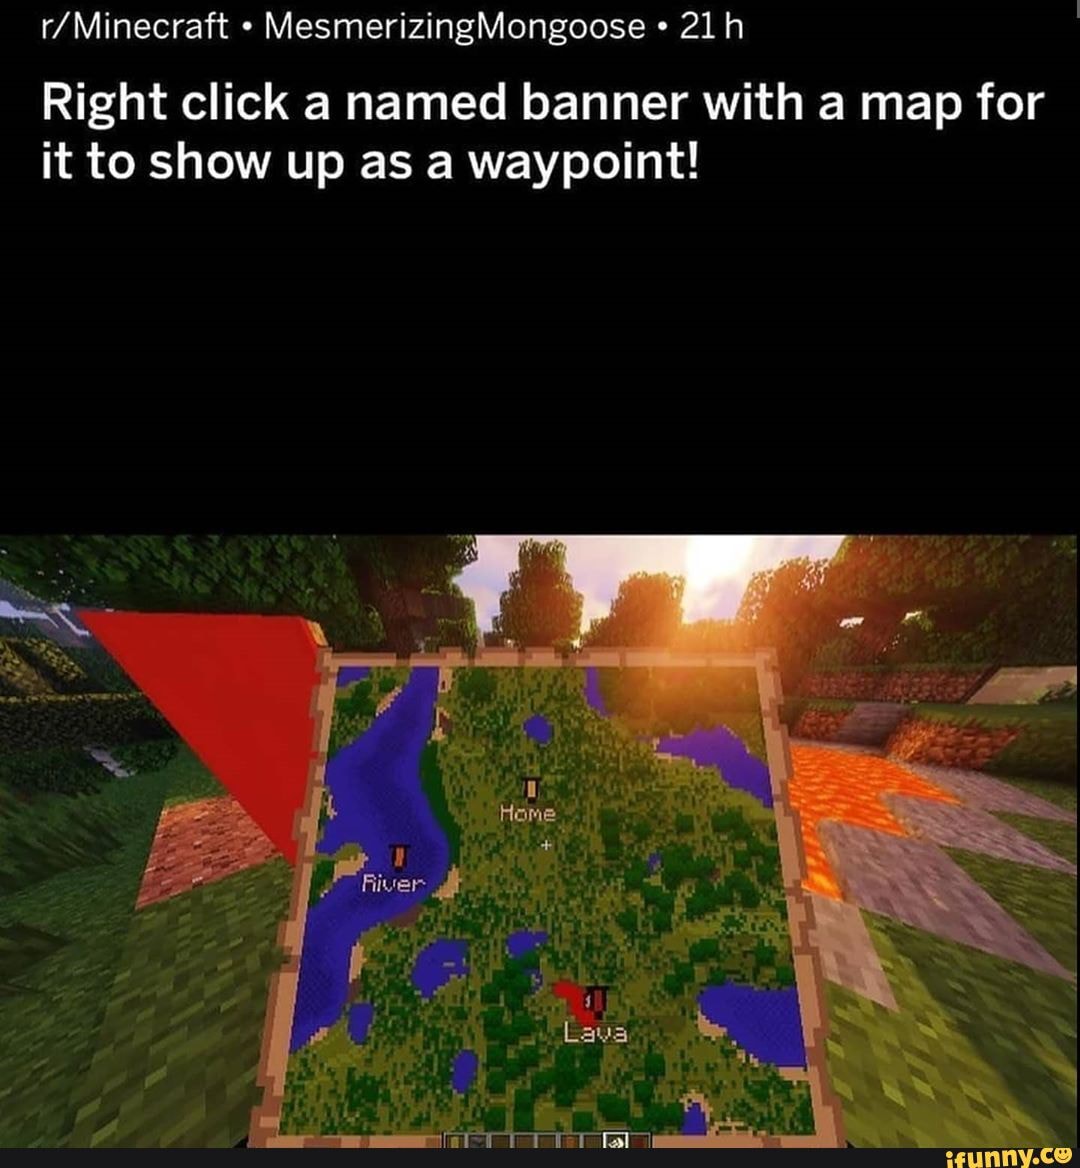 How To Use Banners As Waypoints In Minecraft - Best Banner Design 2018